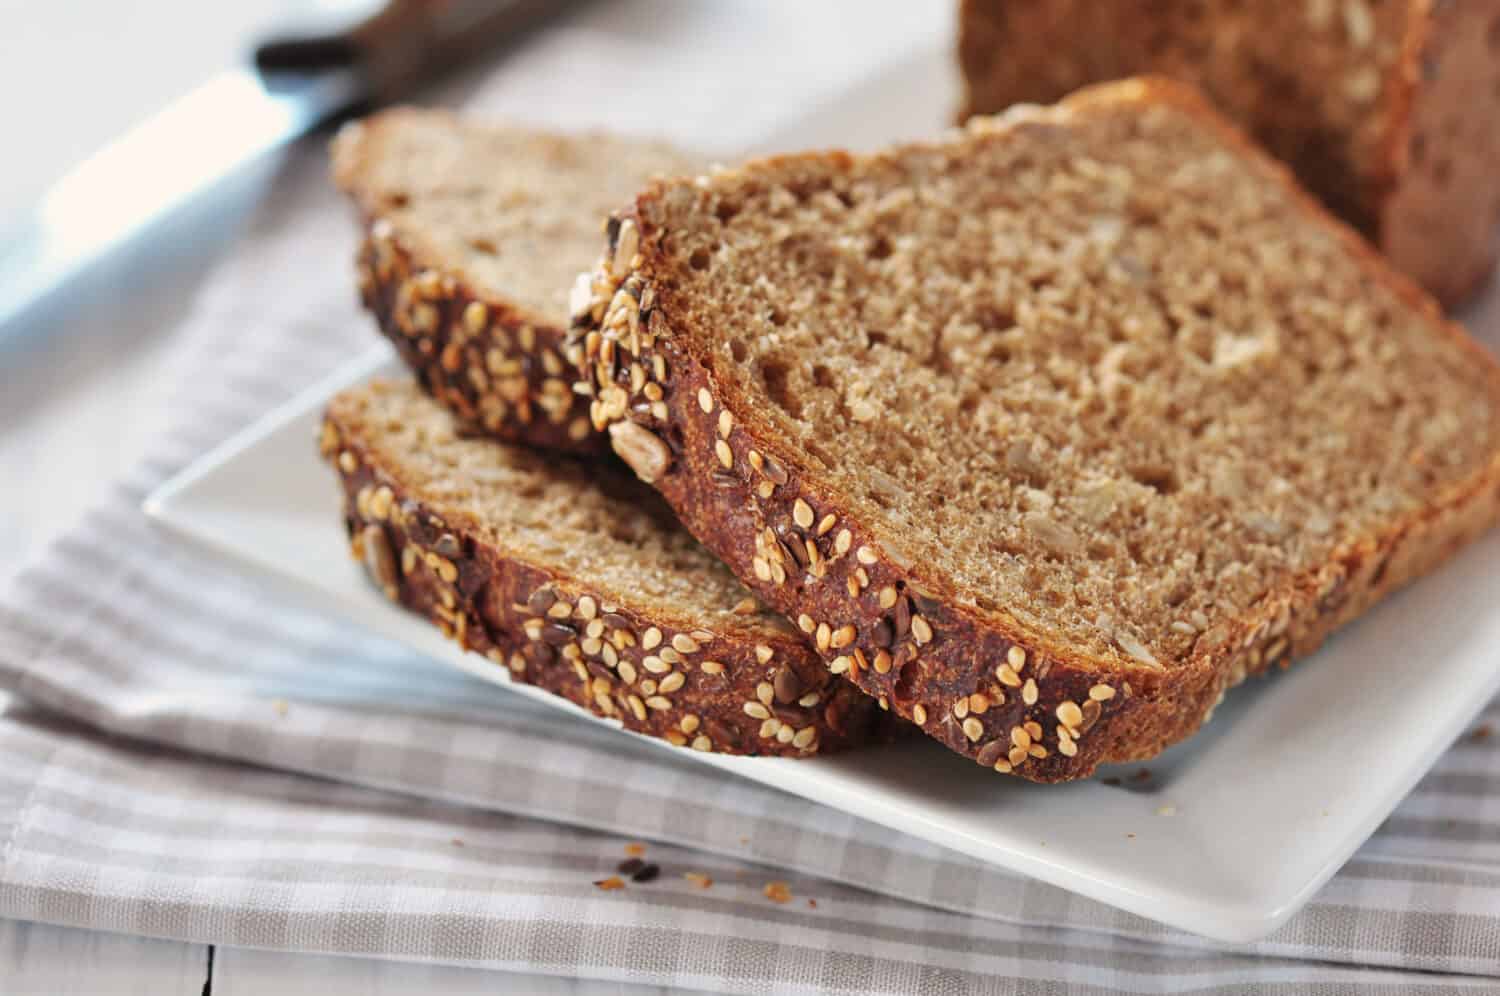 White bread vs. wheat bread: Sliced wheat bread with sunflower seeds and sesame on a plate